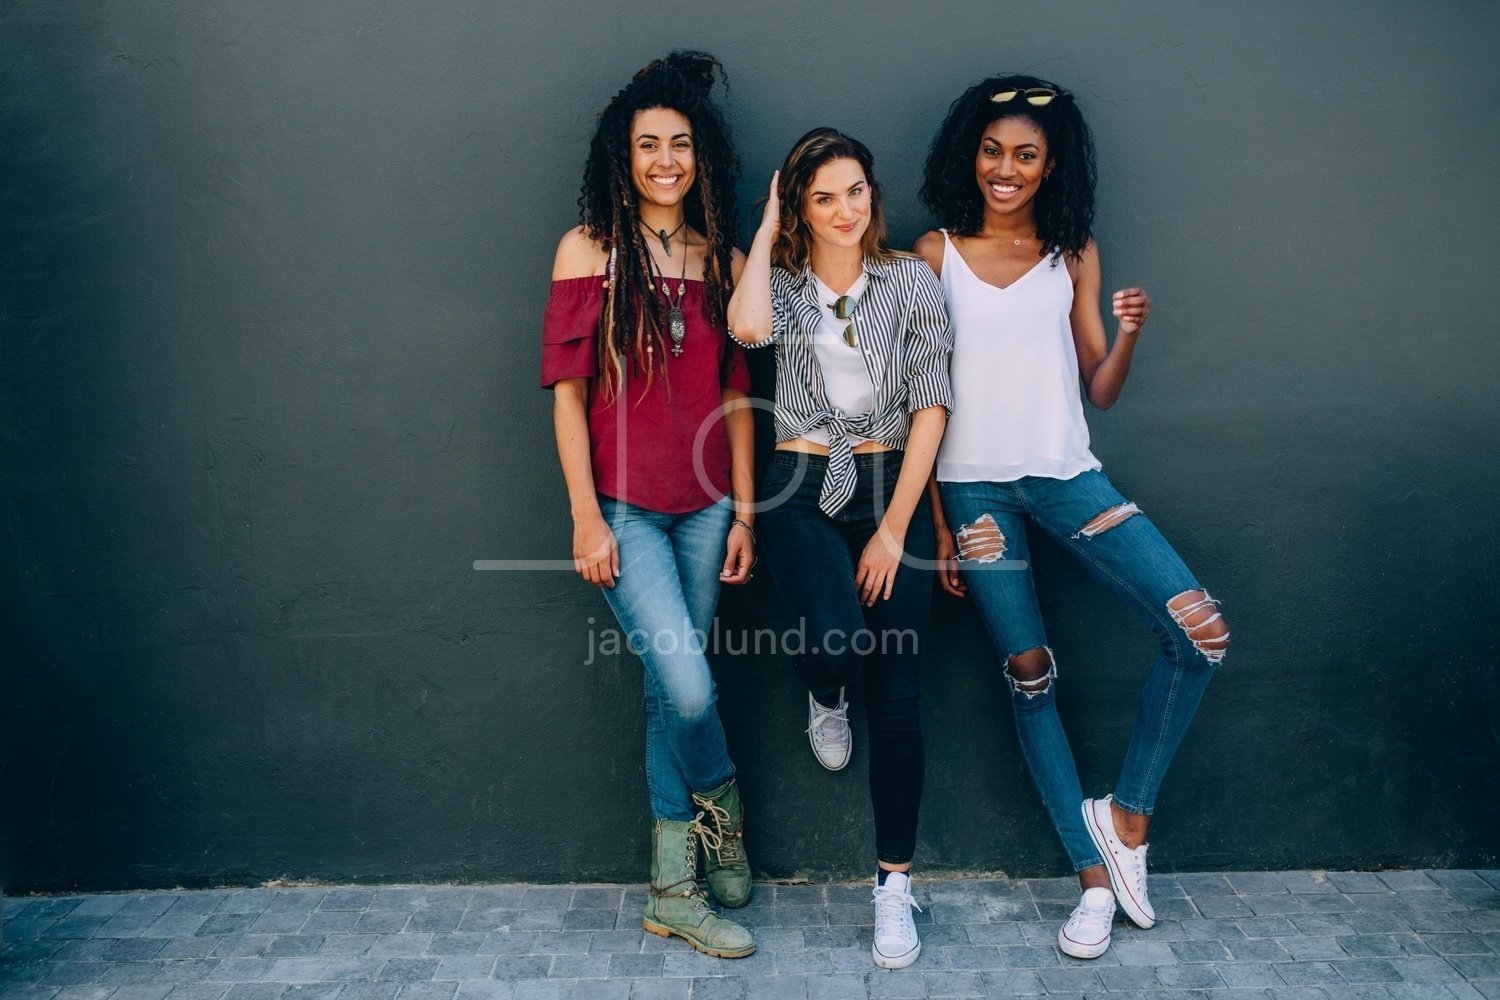 best friends photoshoot | Sisters photoshoot poses, Friend photoshoot,  Sisters photoshoot